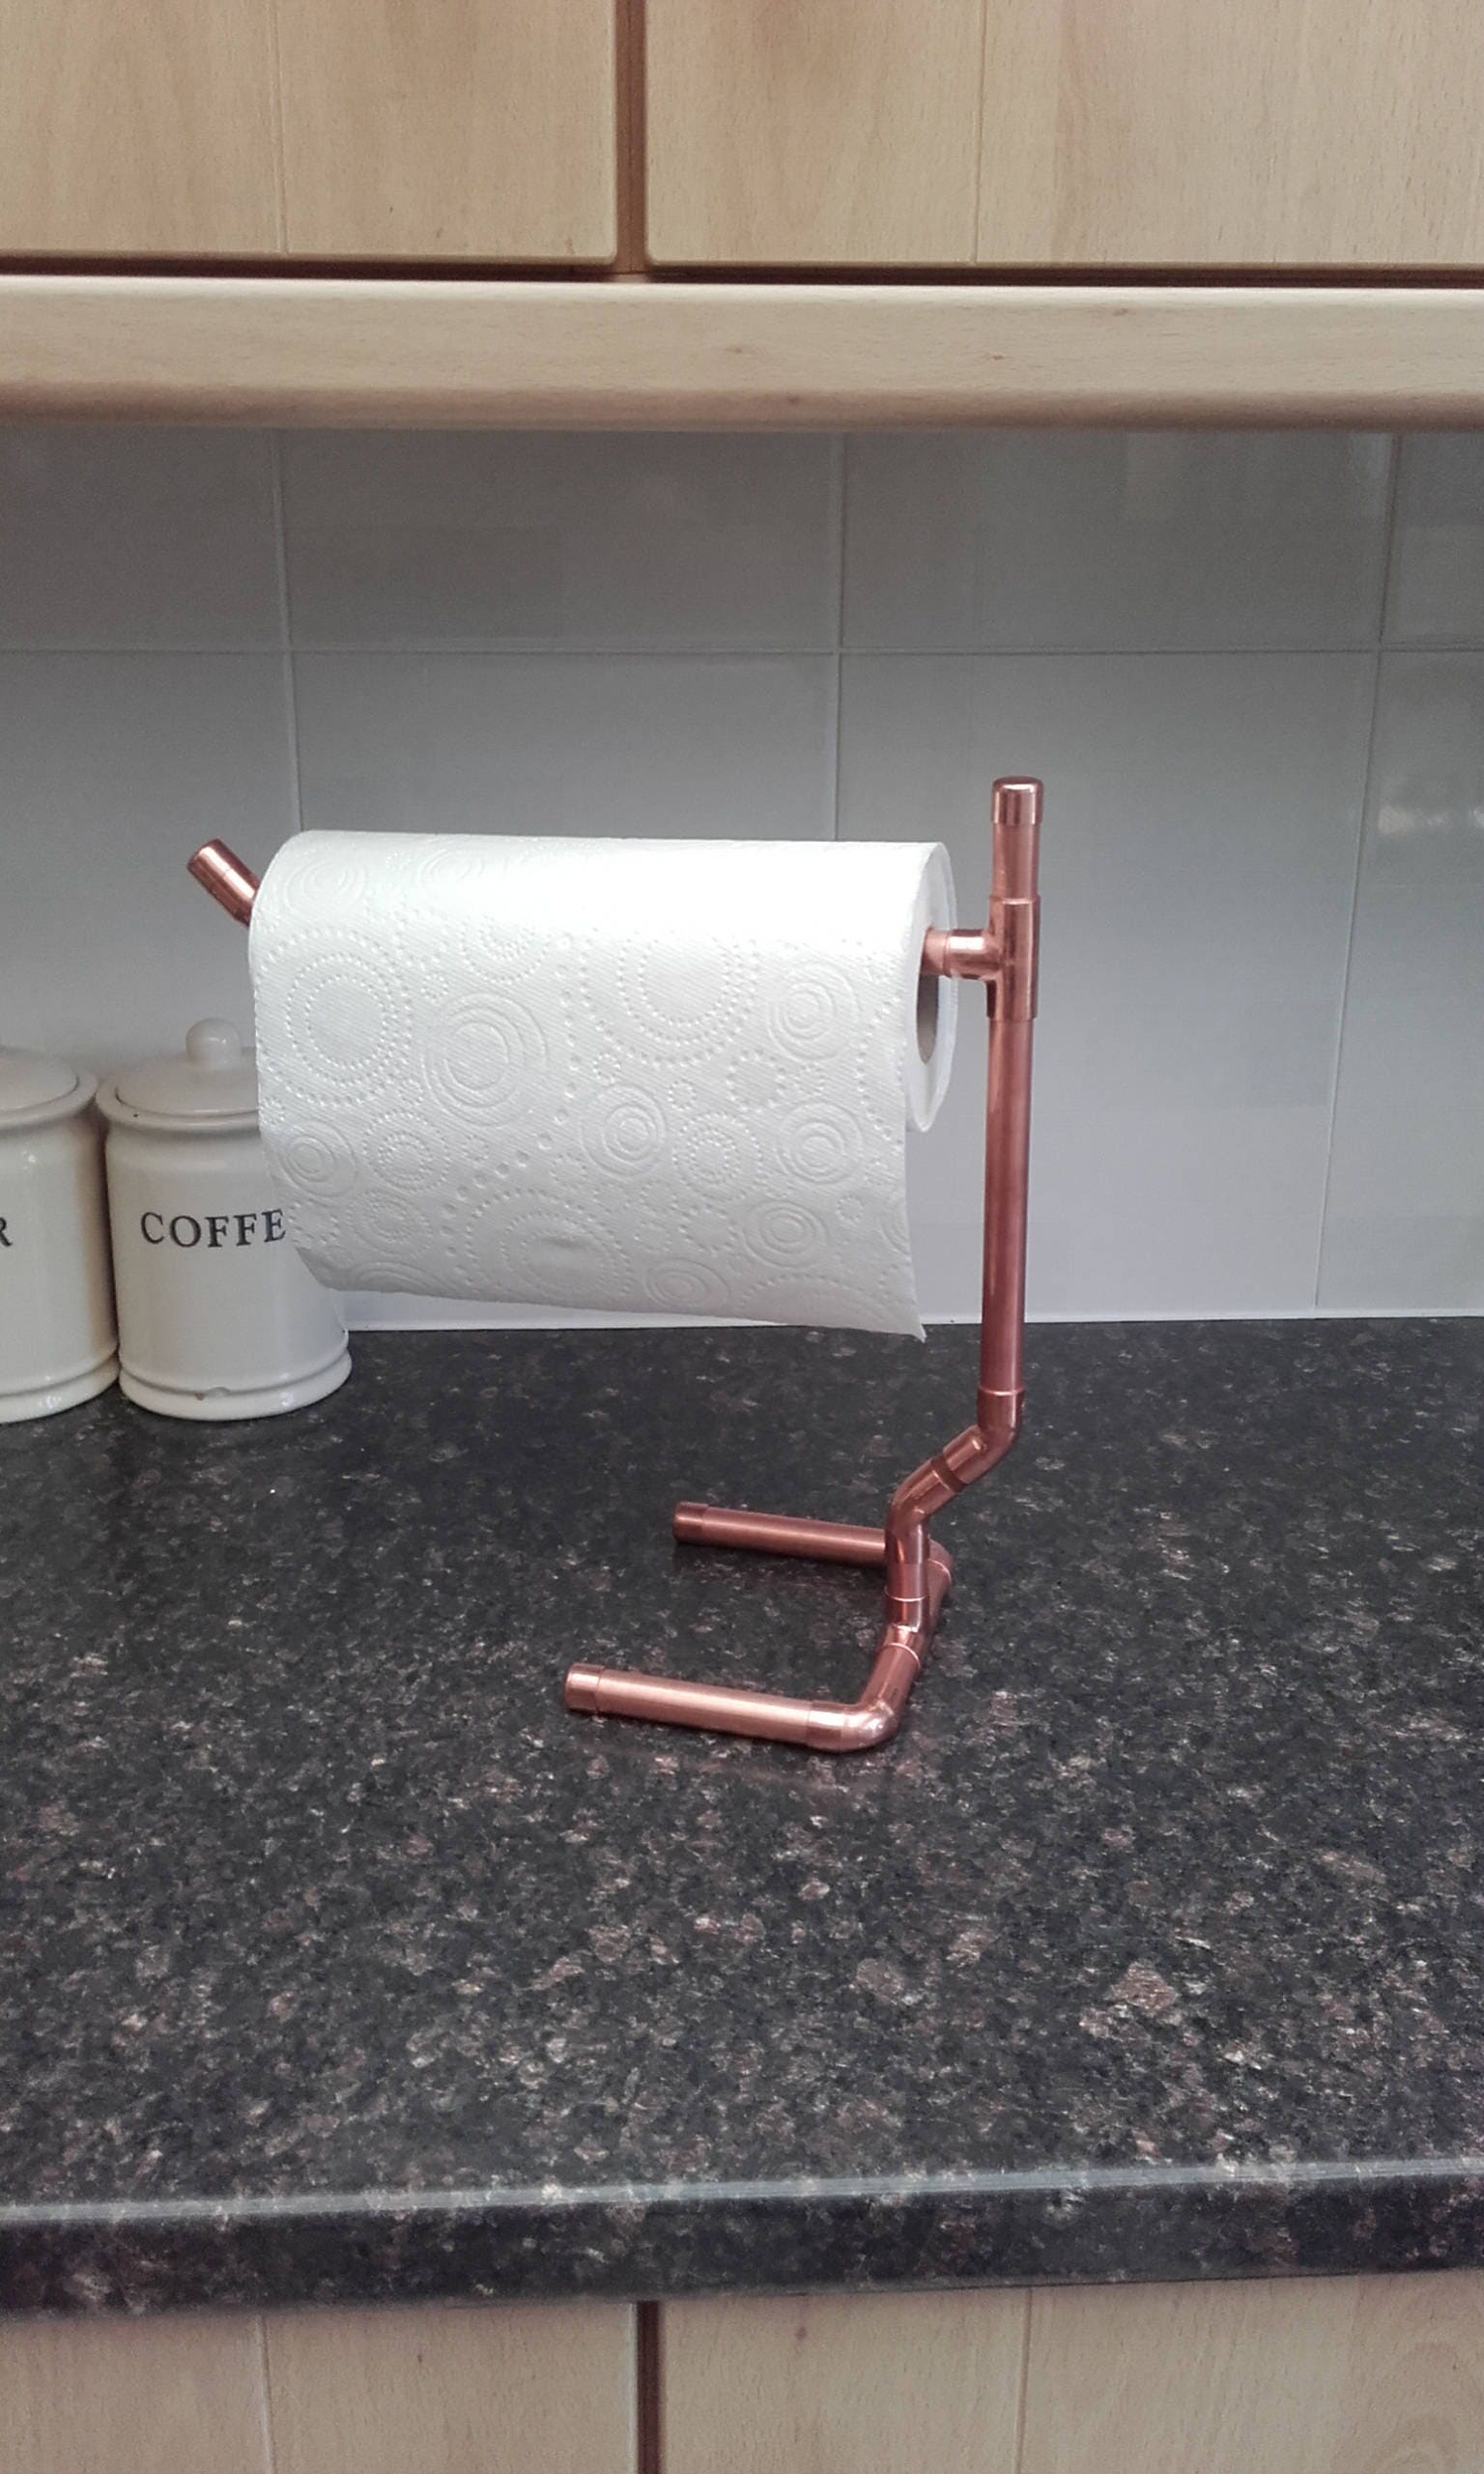 Copper Pipe Counter Top Kitchen Roll Holder, Steampunk, Rosegold